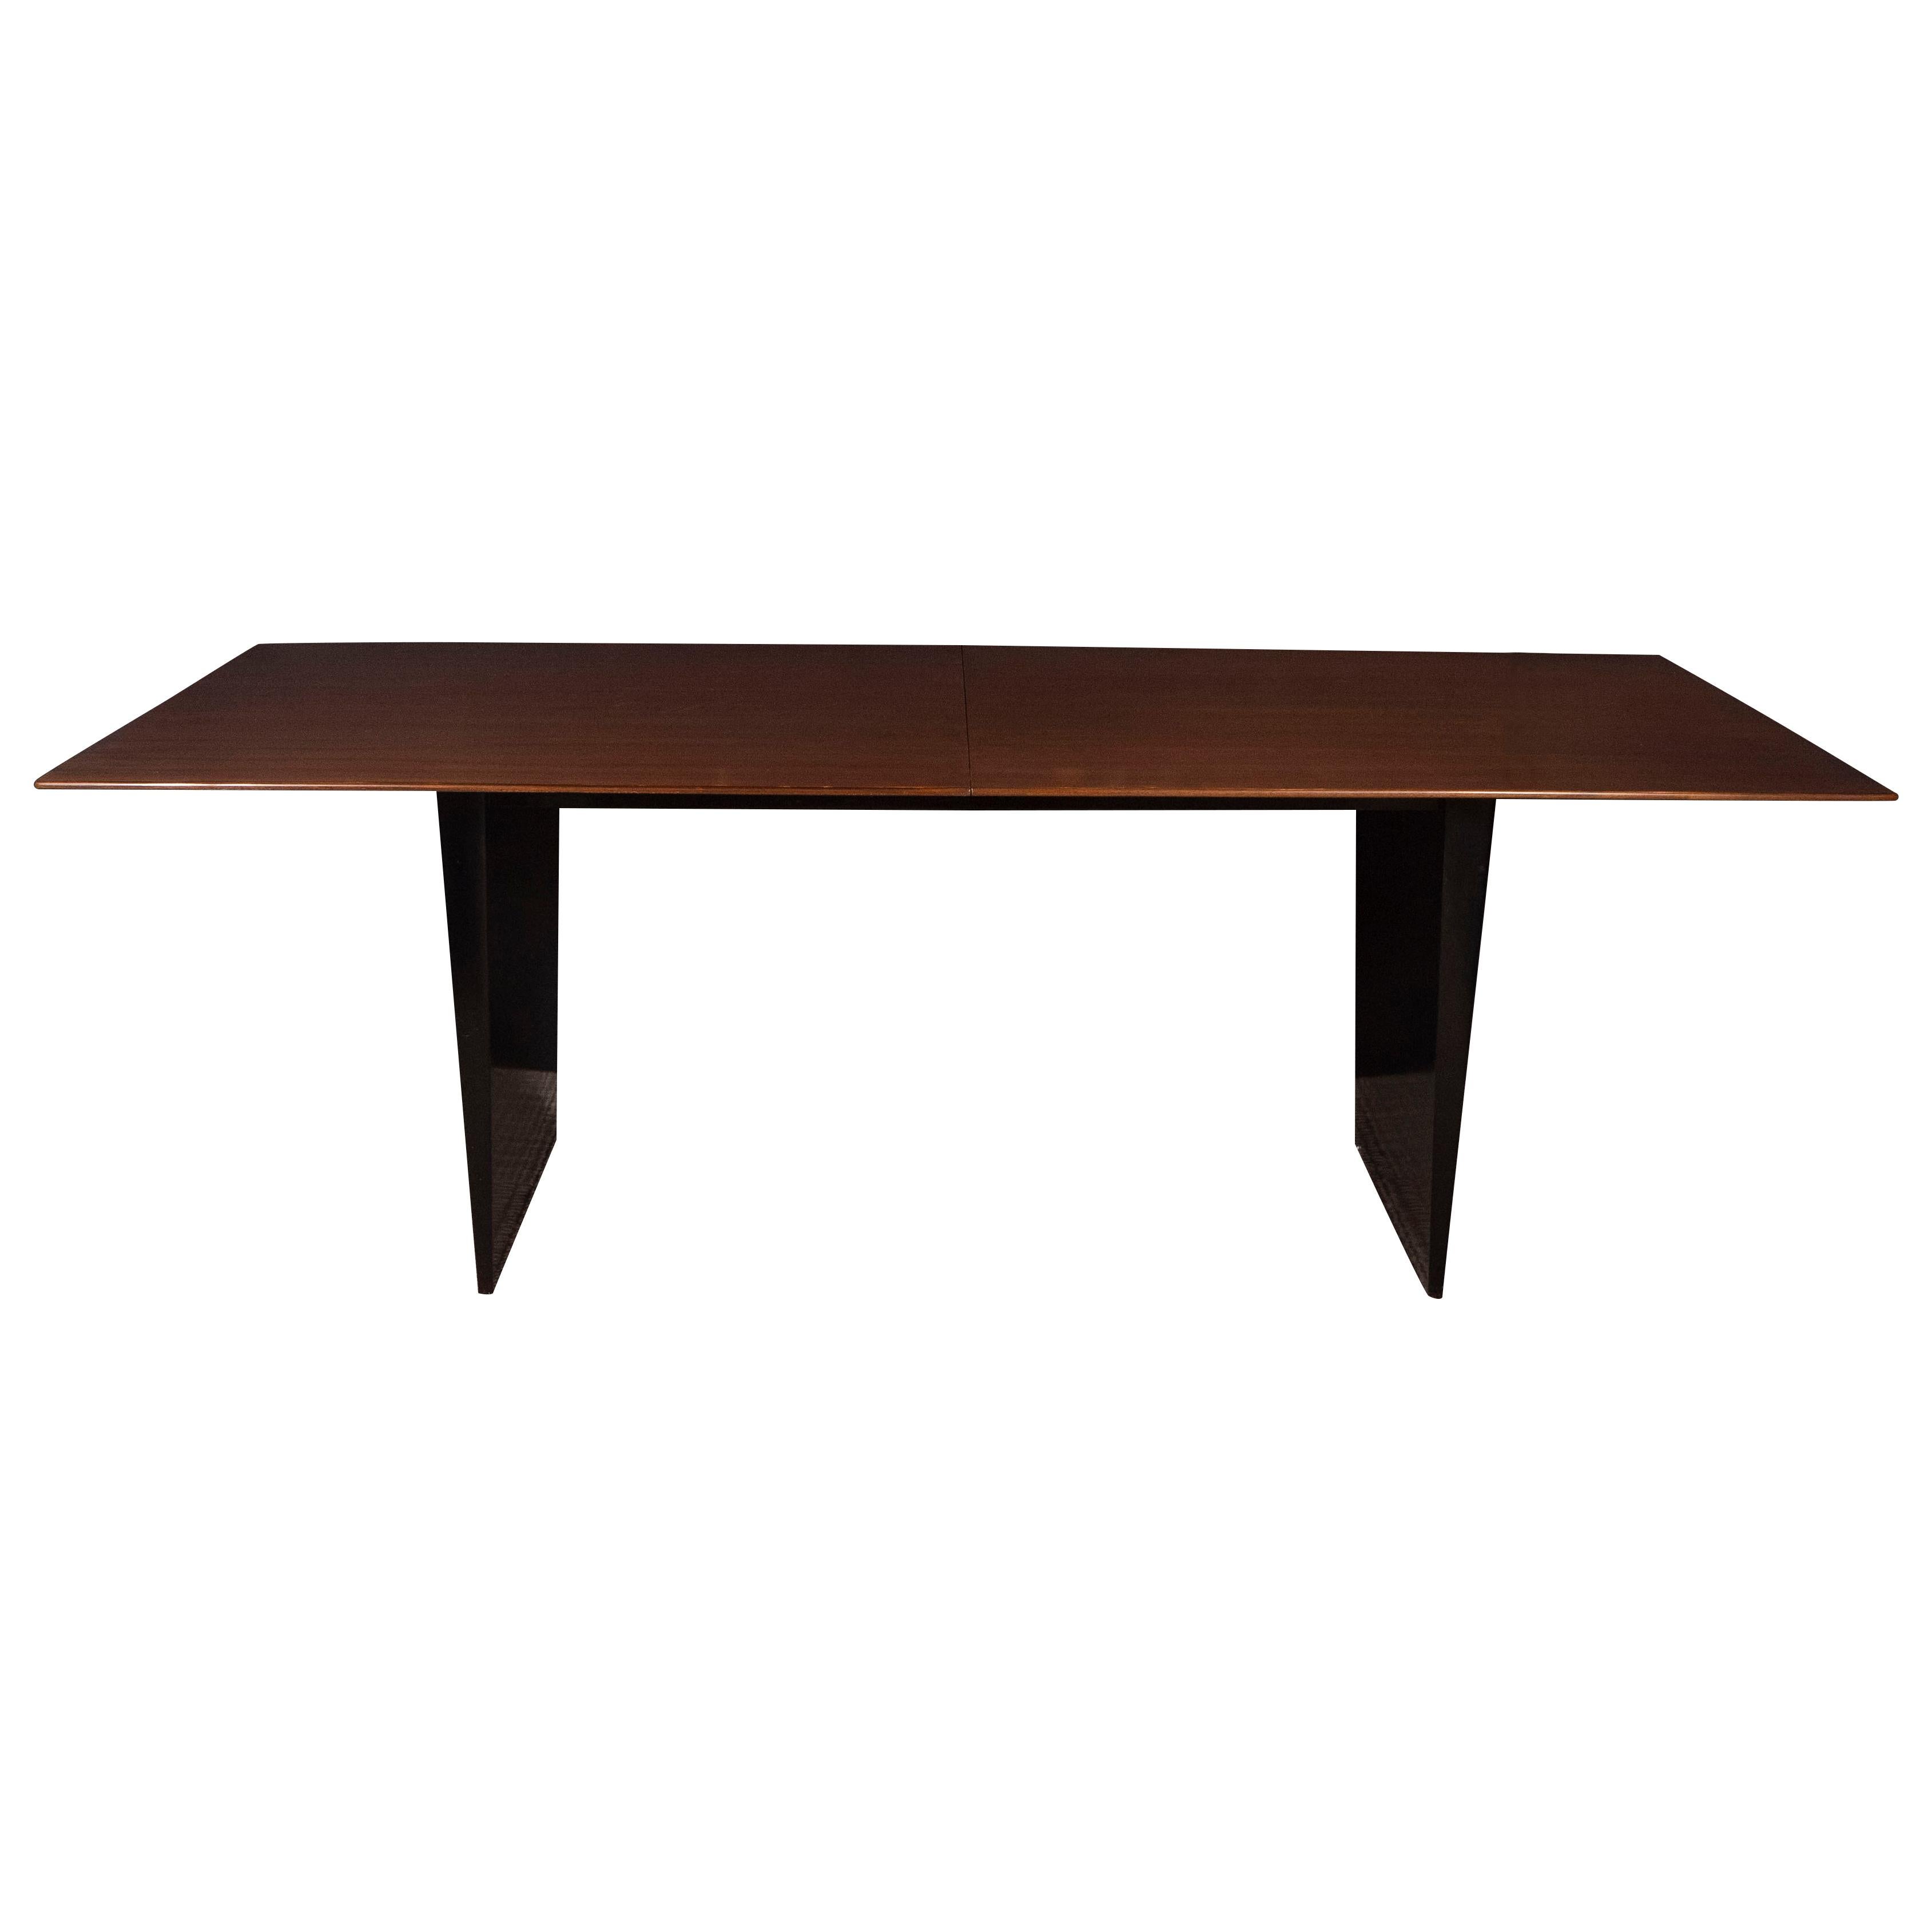 Mid-Century Modern Brown Tawi Dining Table by Edward Wormley for Dunbar